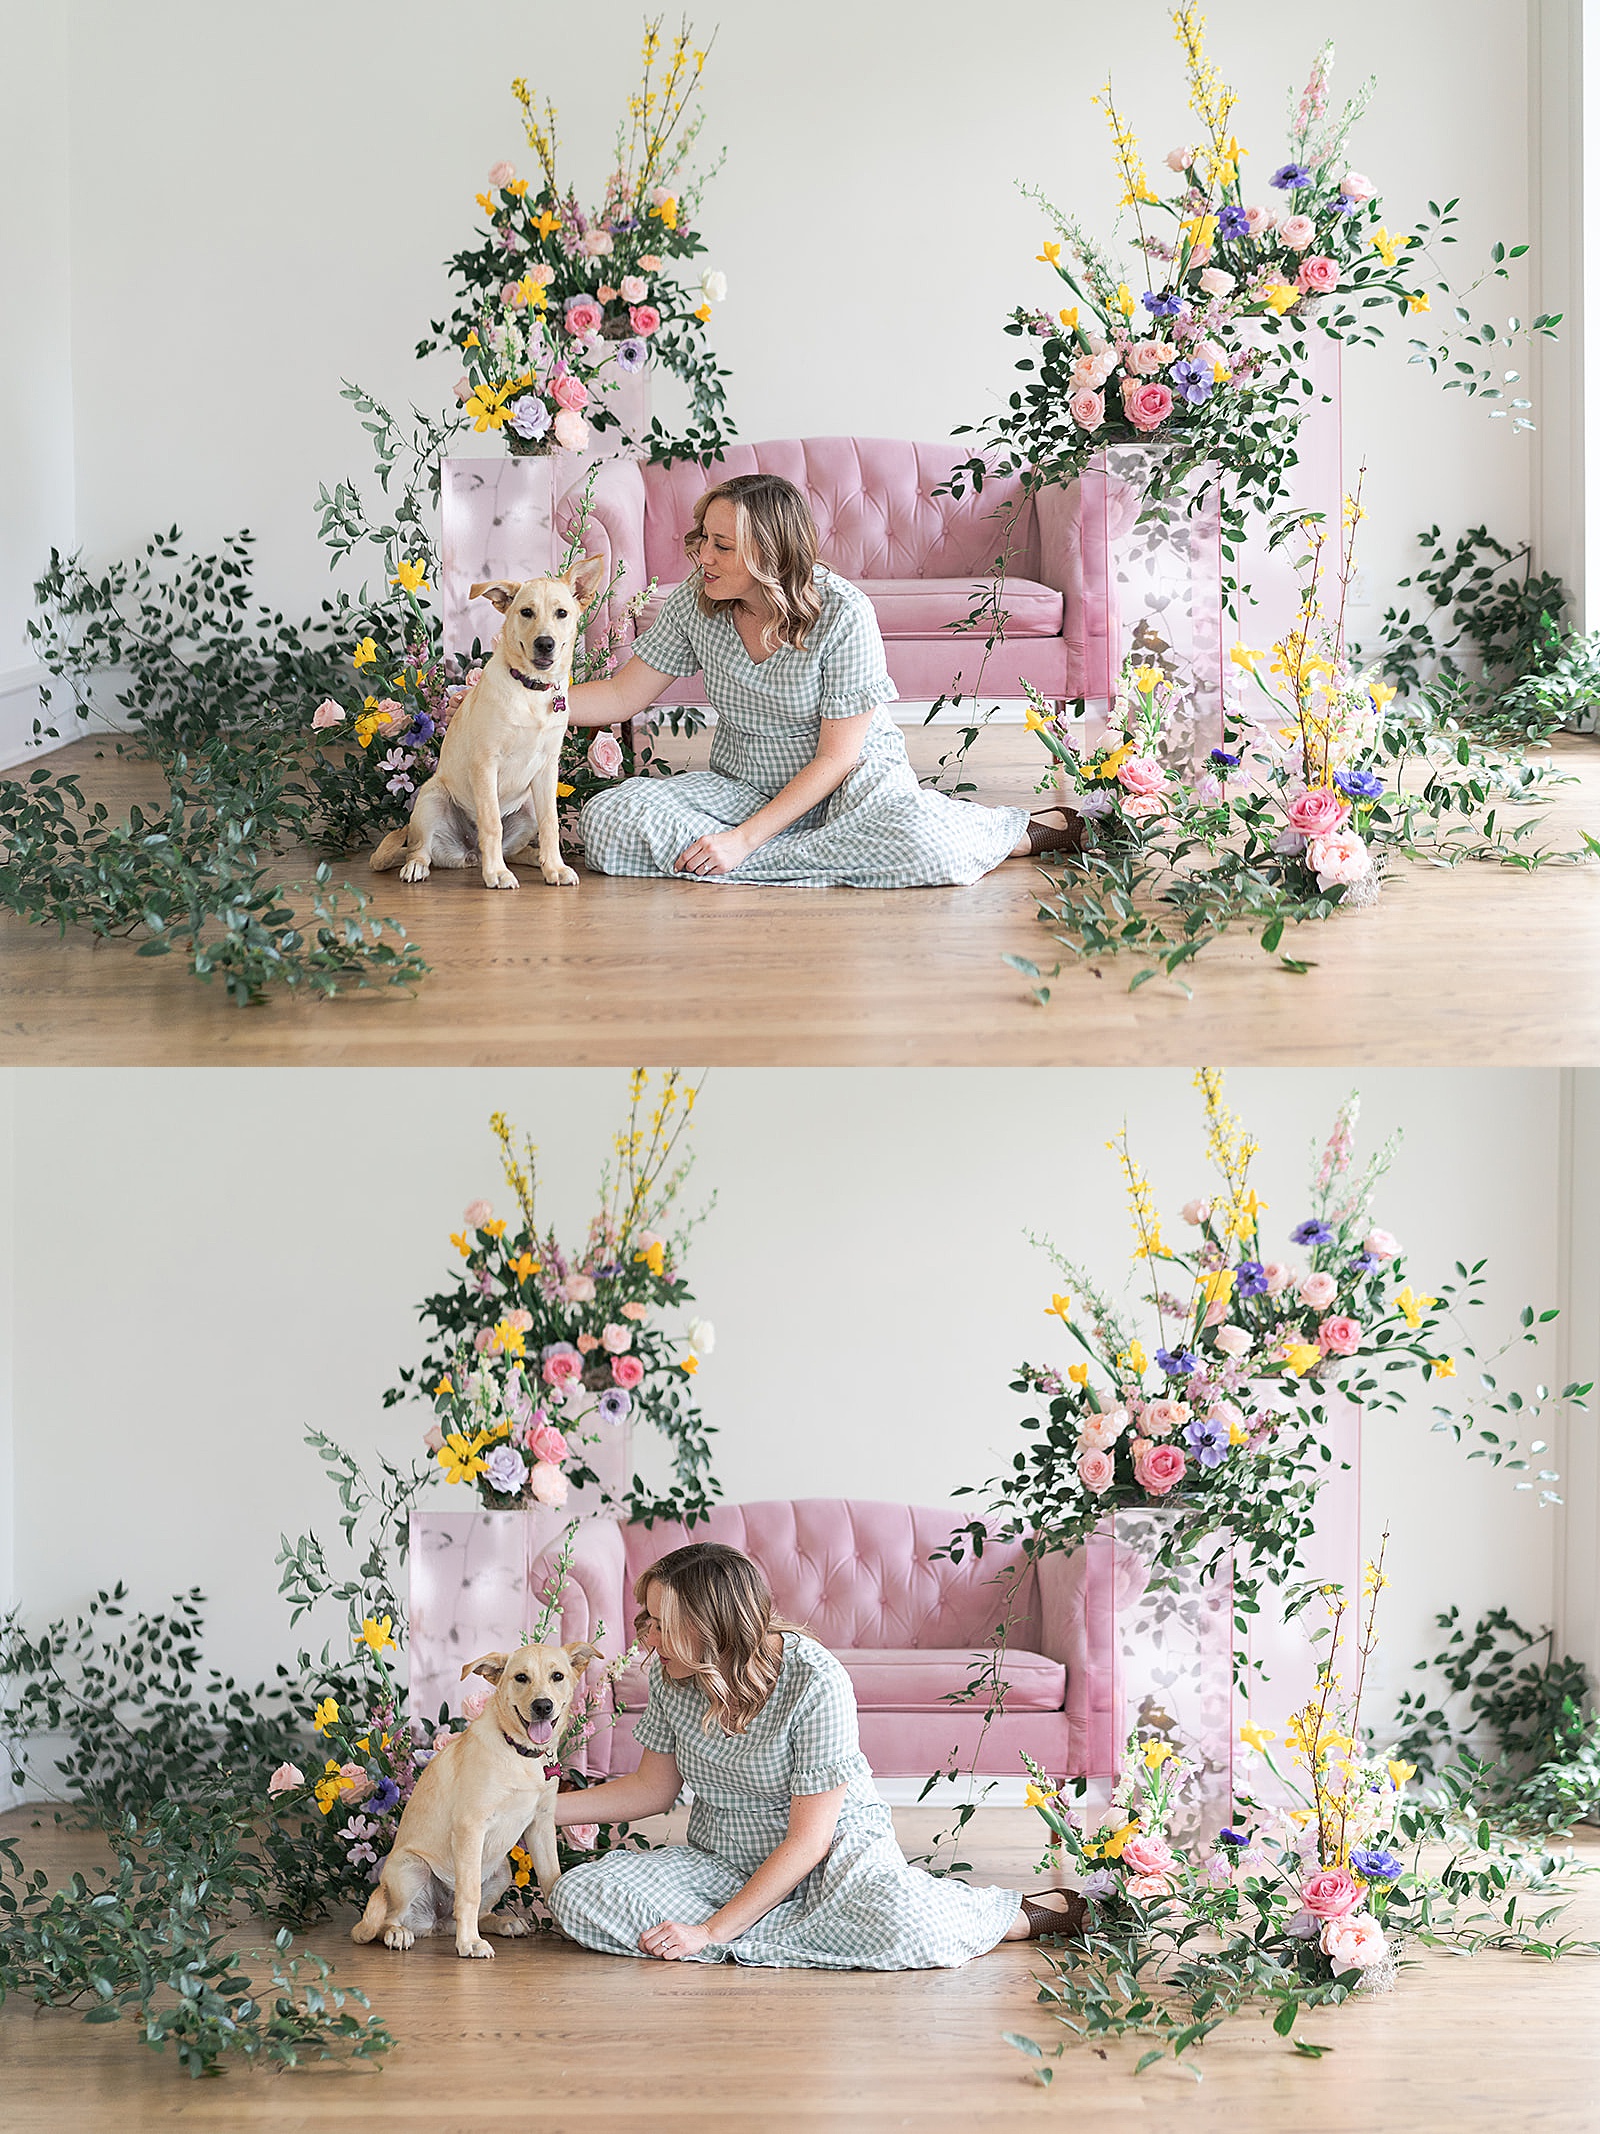 Colorful floral installations surround woman and her dog by Amanda Bee’s Floral Design